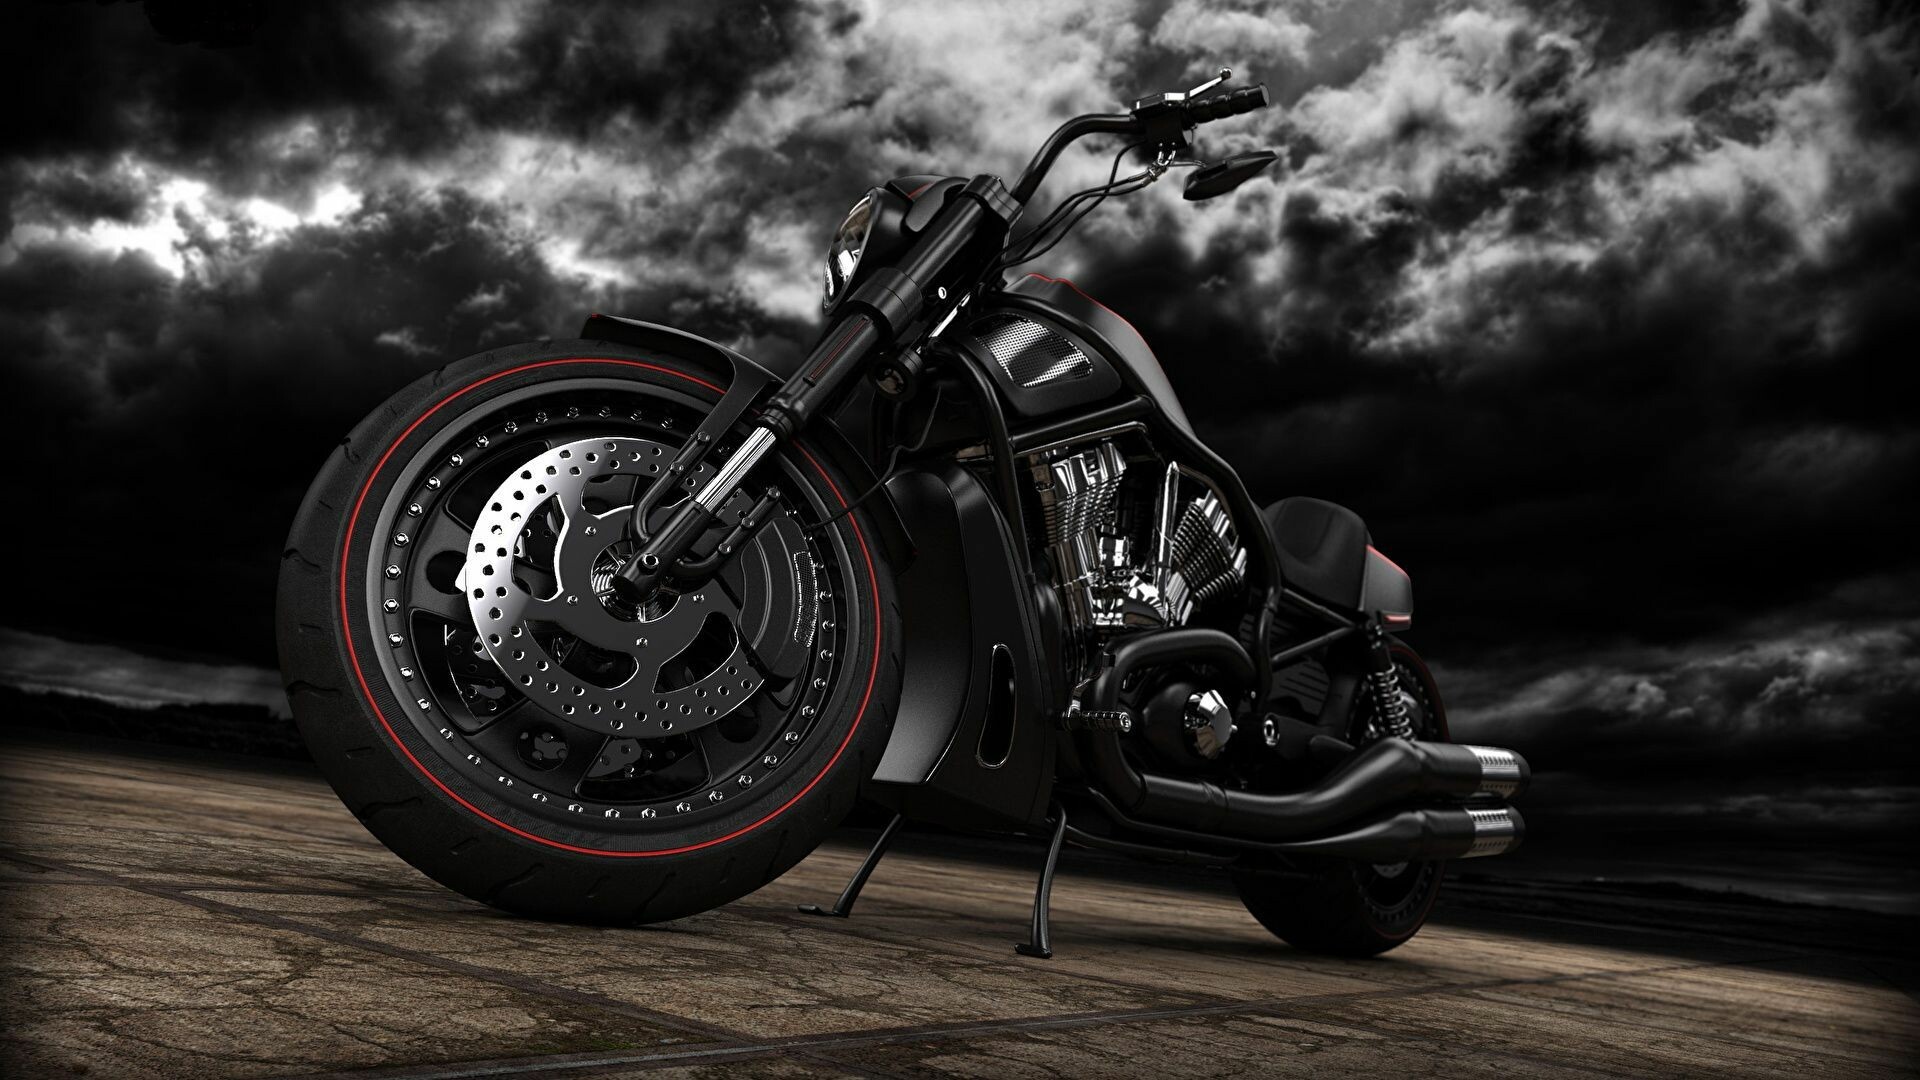 Harley-Davidson: V-Rod, An American motorcycle manufacturer headquartered in Milwaukee, Wisconsin. 1920x1080 Full HD Wallpaper.